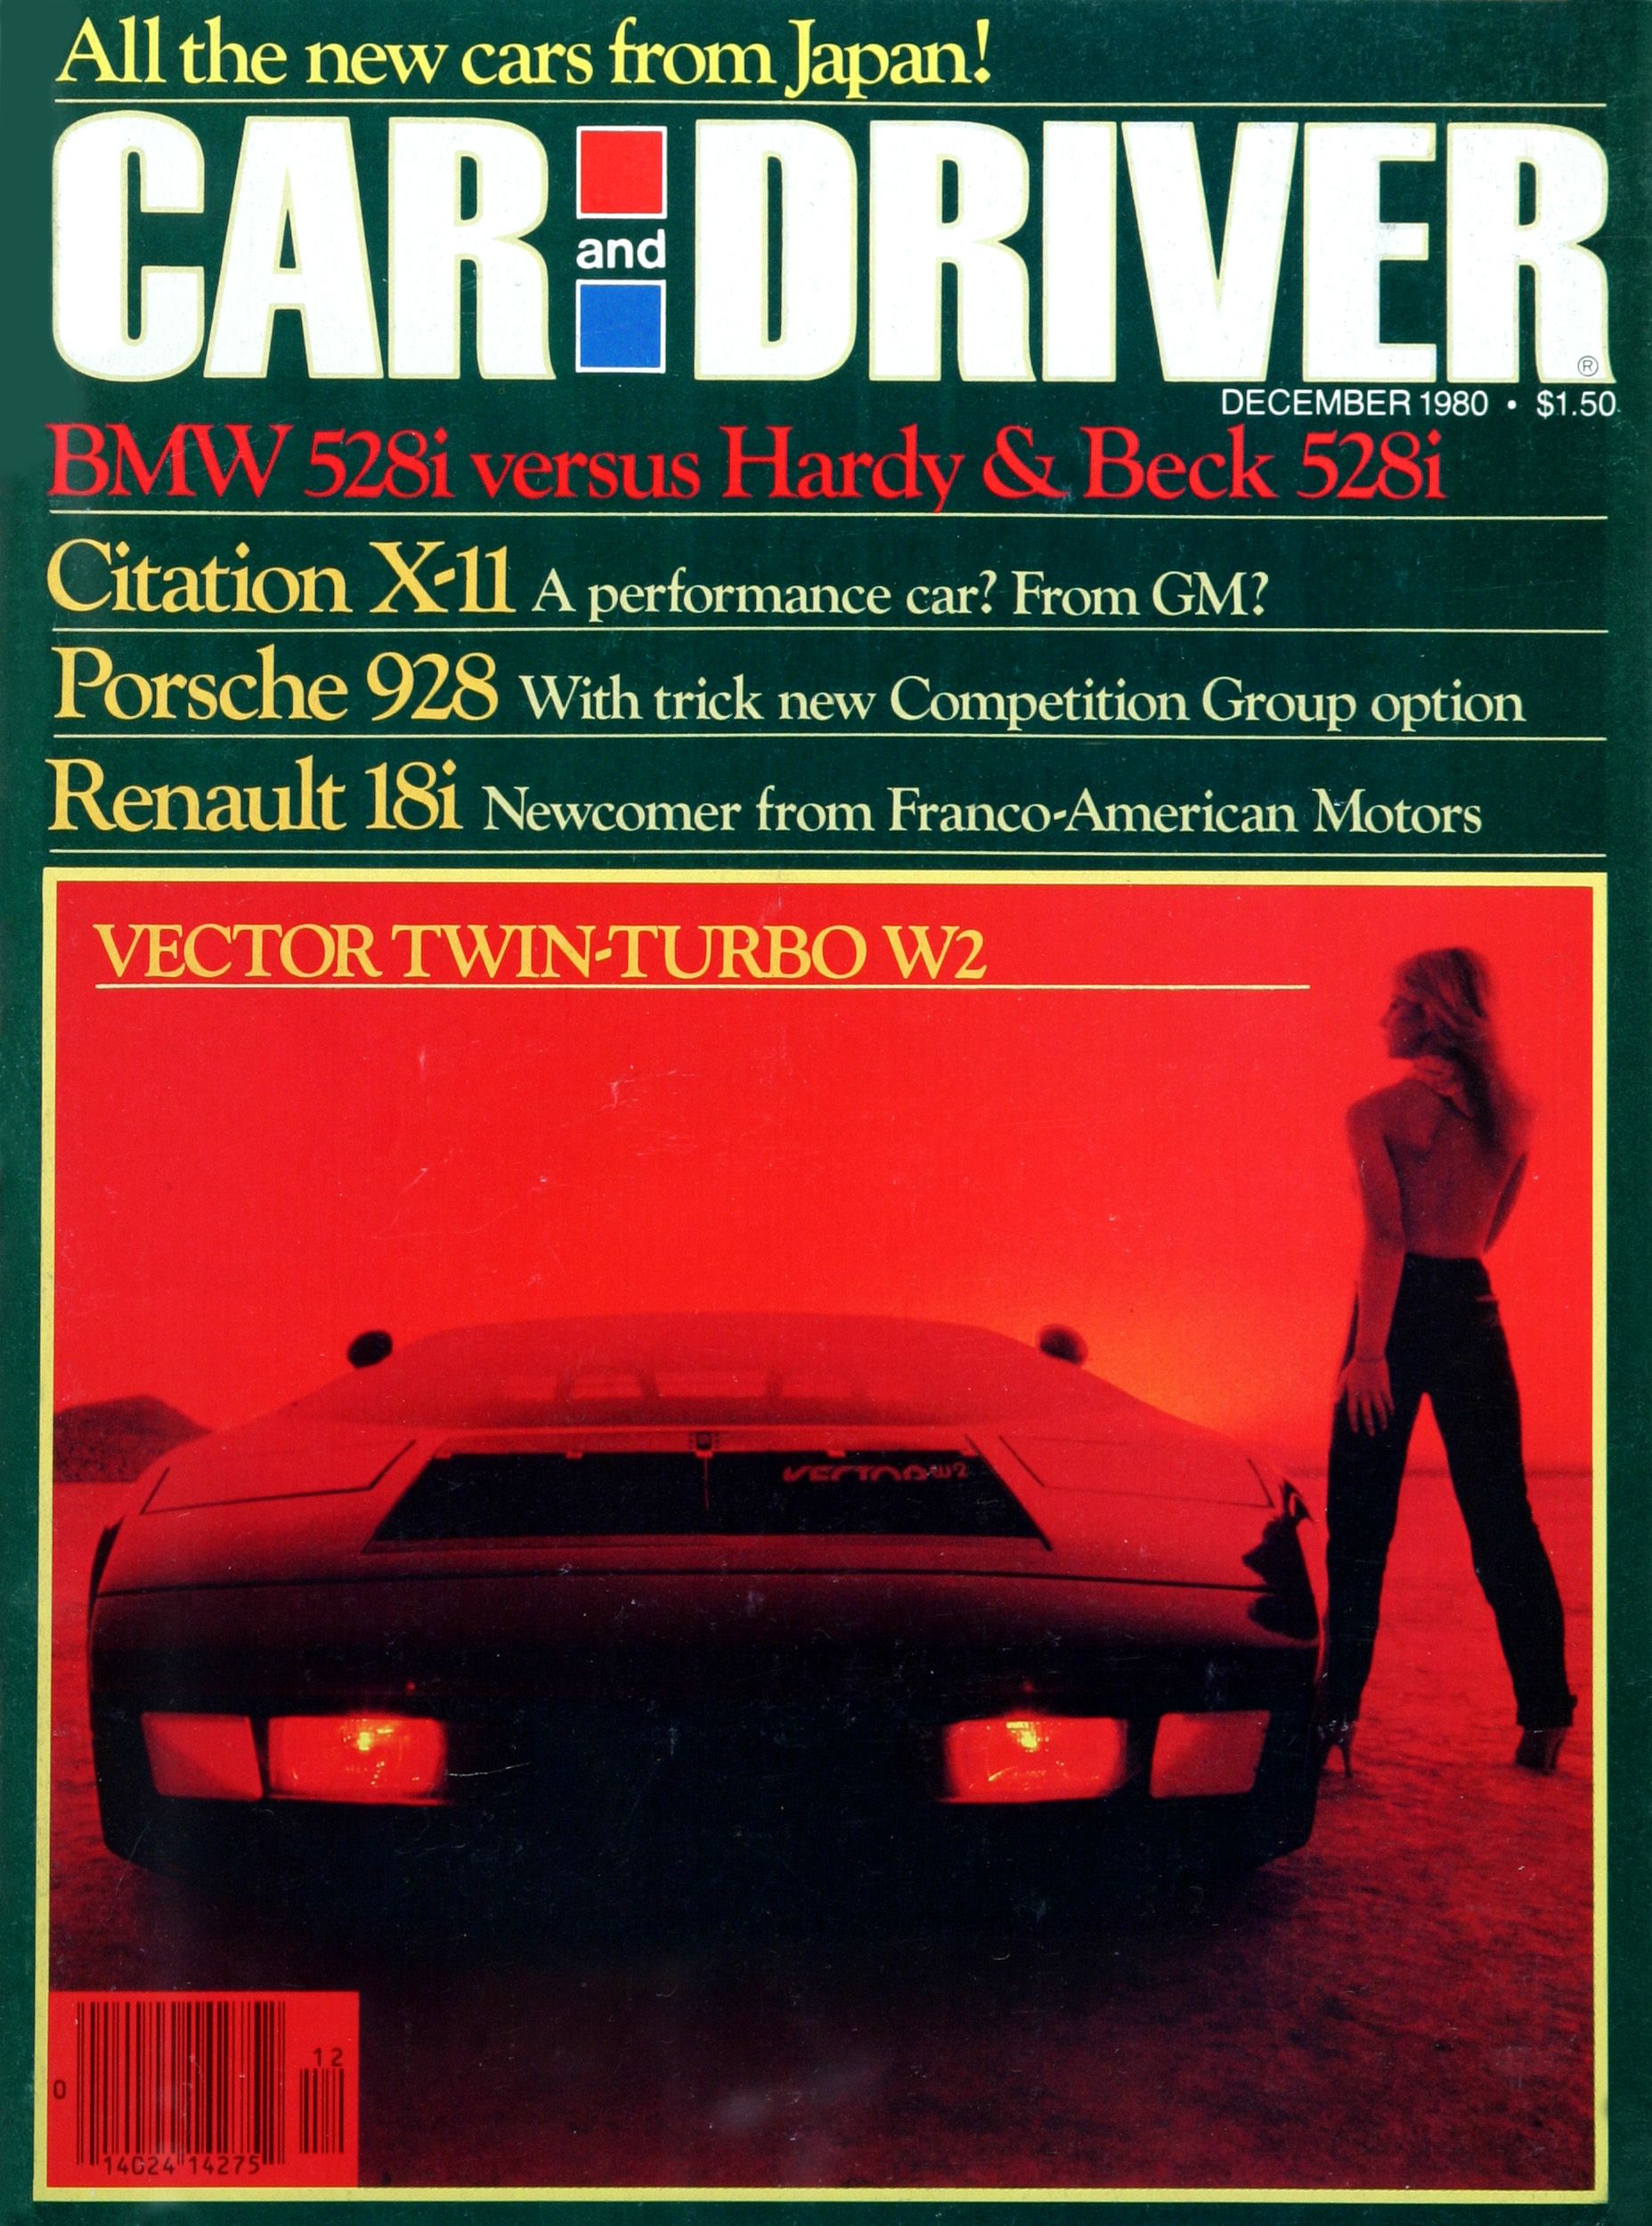 Like, Totally Rad: The Car and Driver Covers of the 1980s